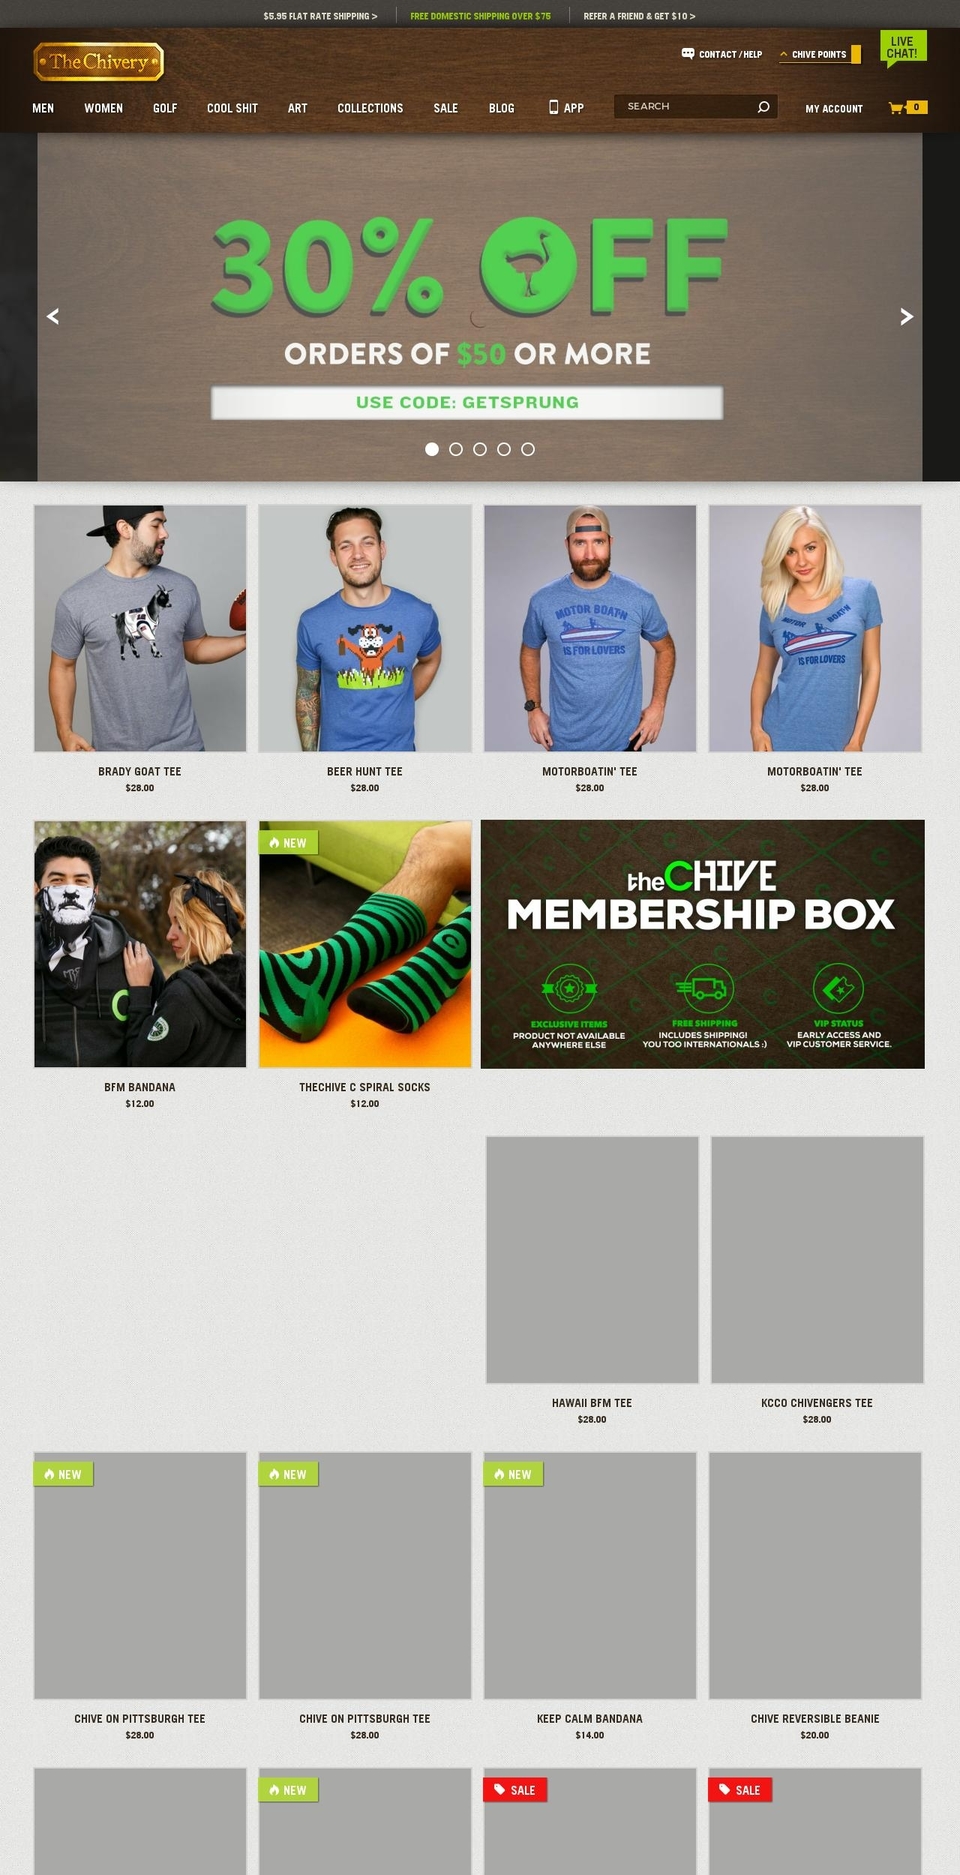 Prestige Shopify theme site example thechivery.com